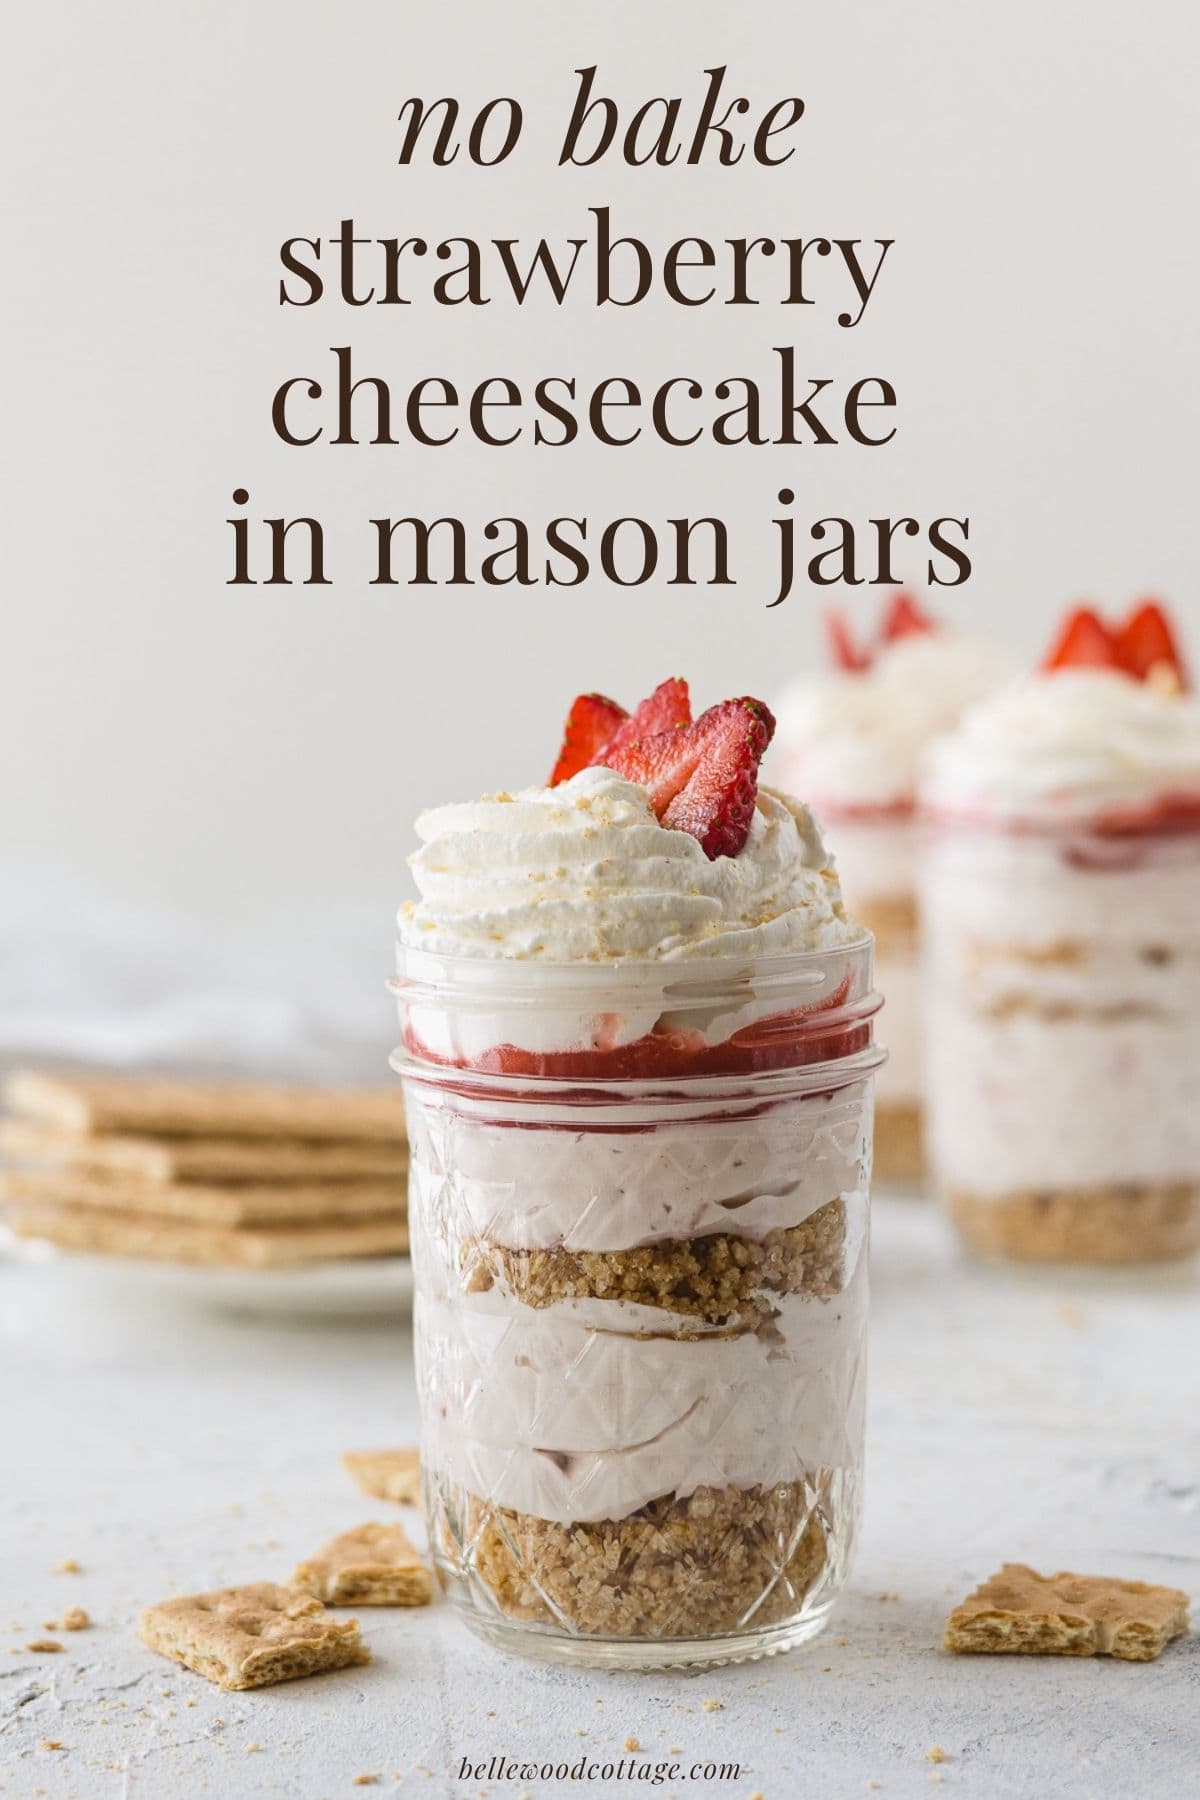 A layered strawberry cheesecake in a jar with the words, "No Bake Strawberry Cheesecakes in Mason Jars".